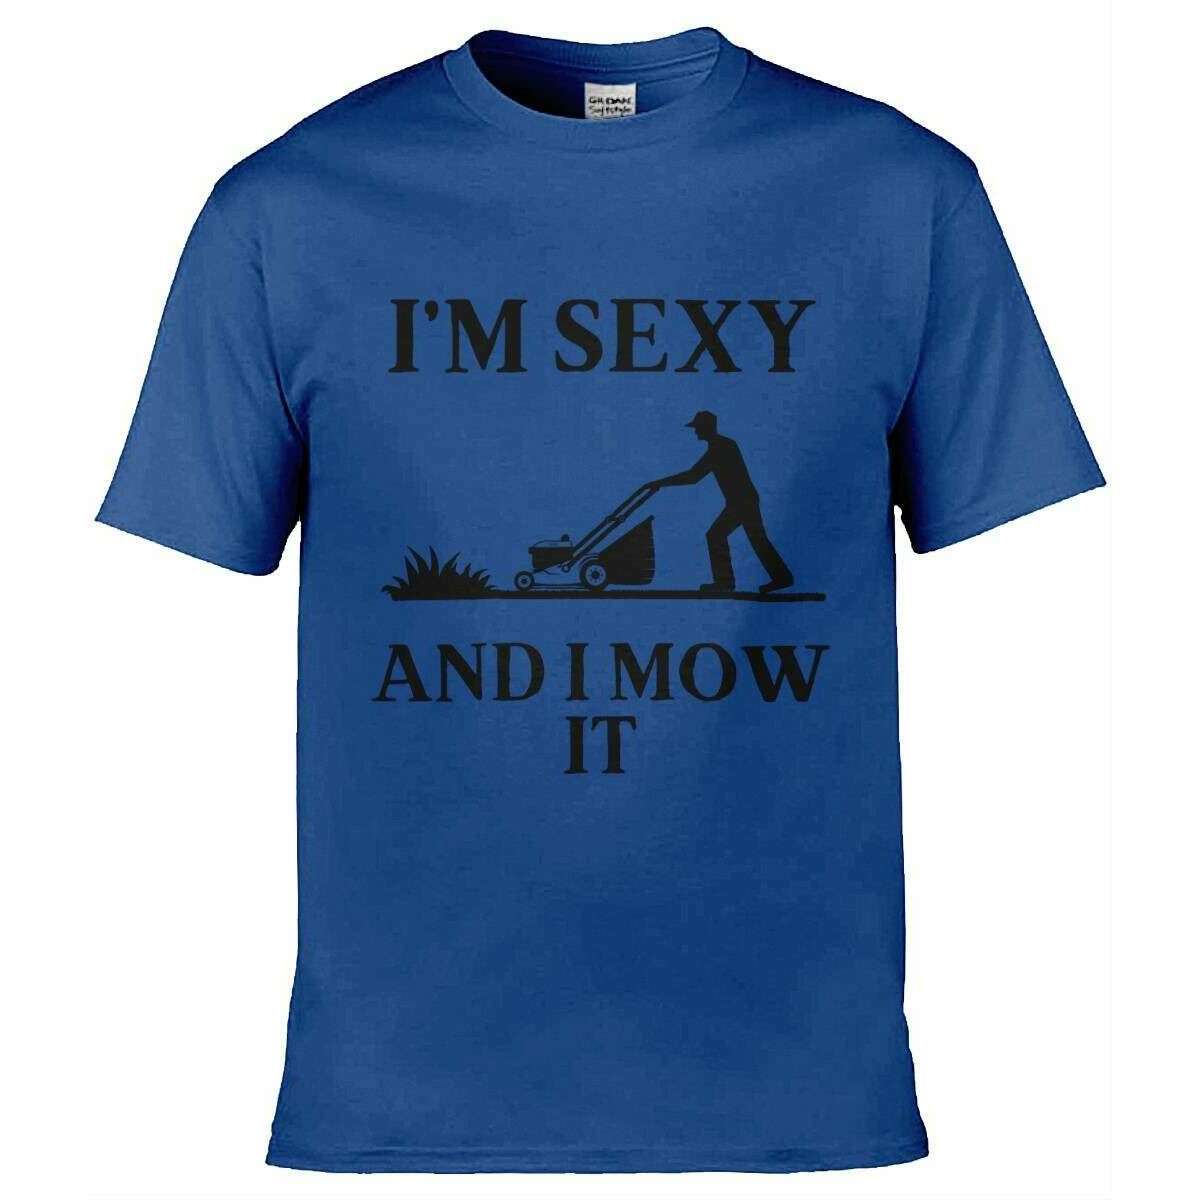 Teemarkable! I’m Sexy and I Mow It T-Shirt